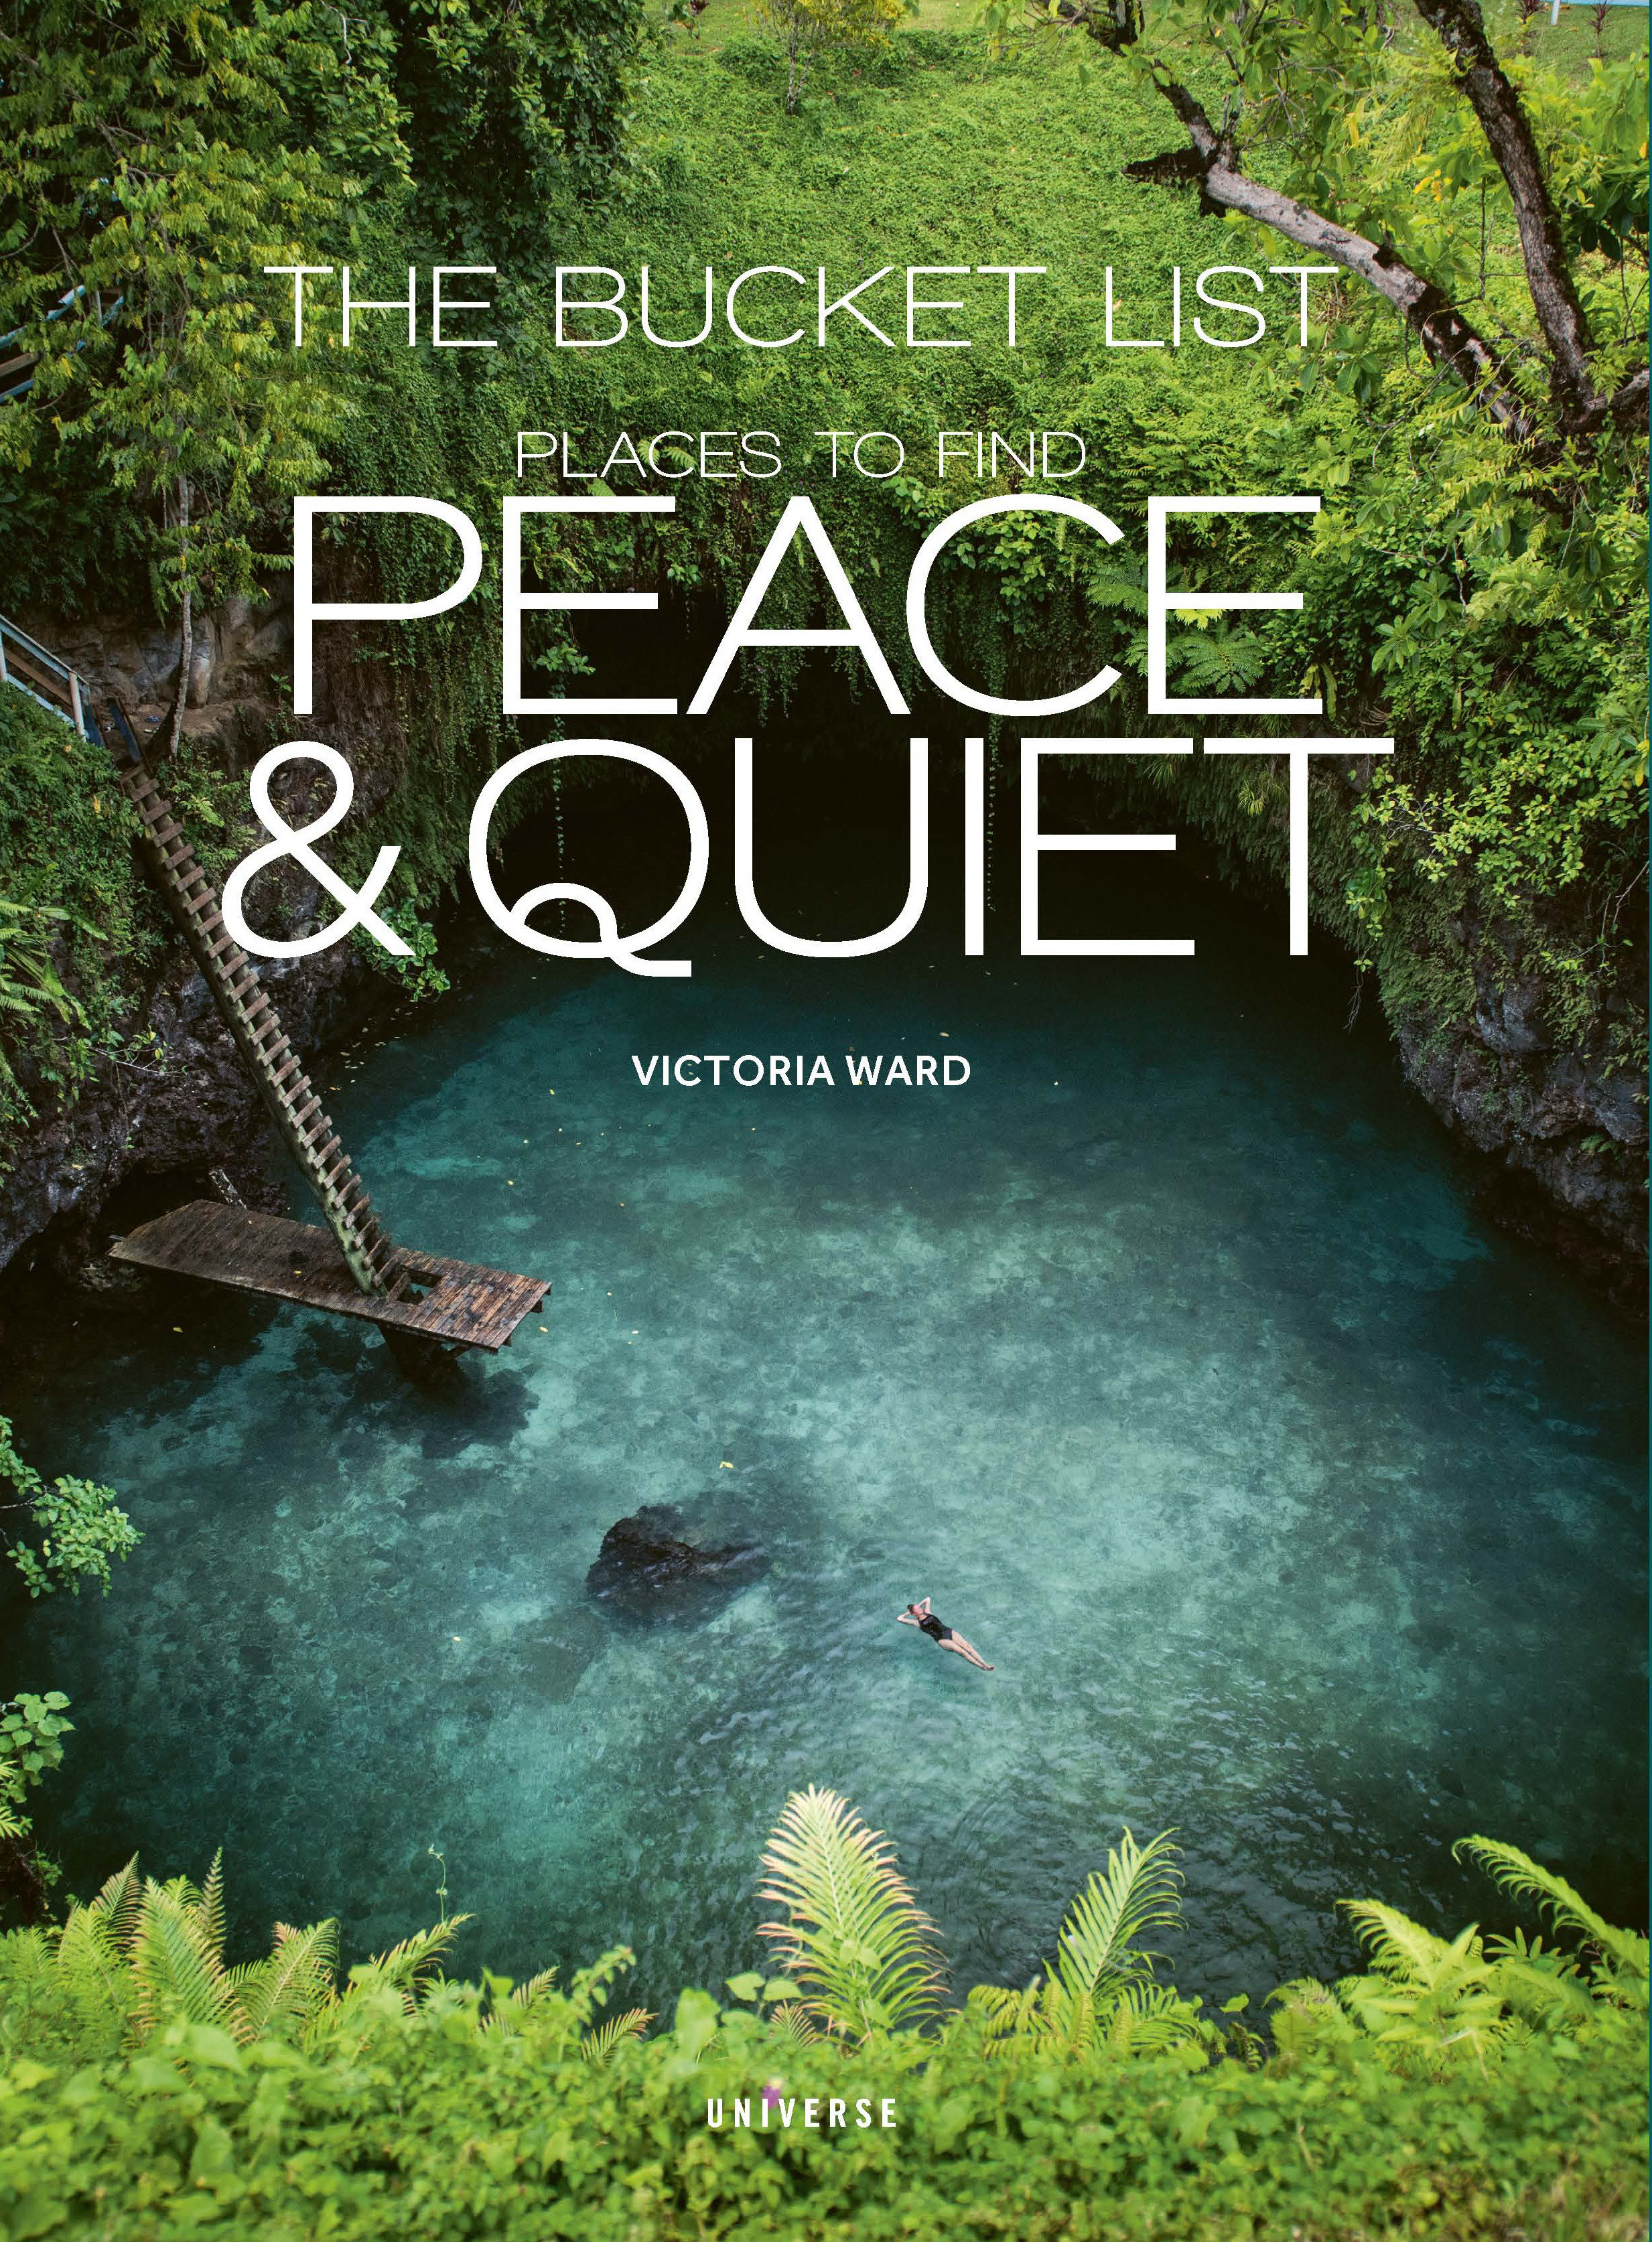 The Bucket List: Places To Find Peace And Quiet (Hardcover Book)